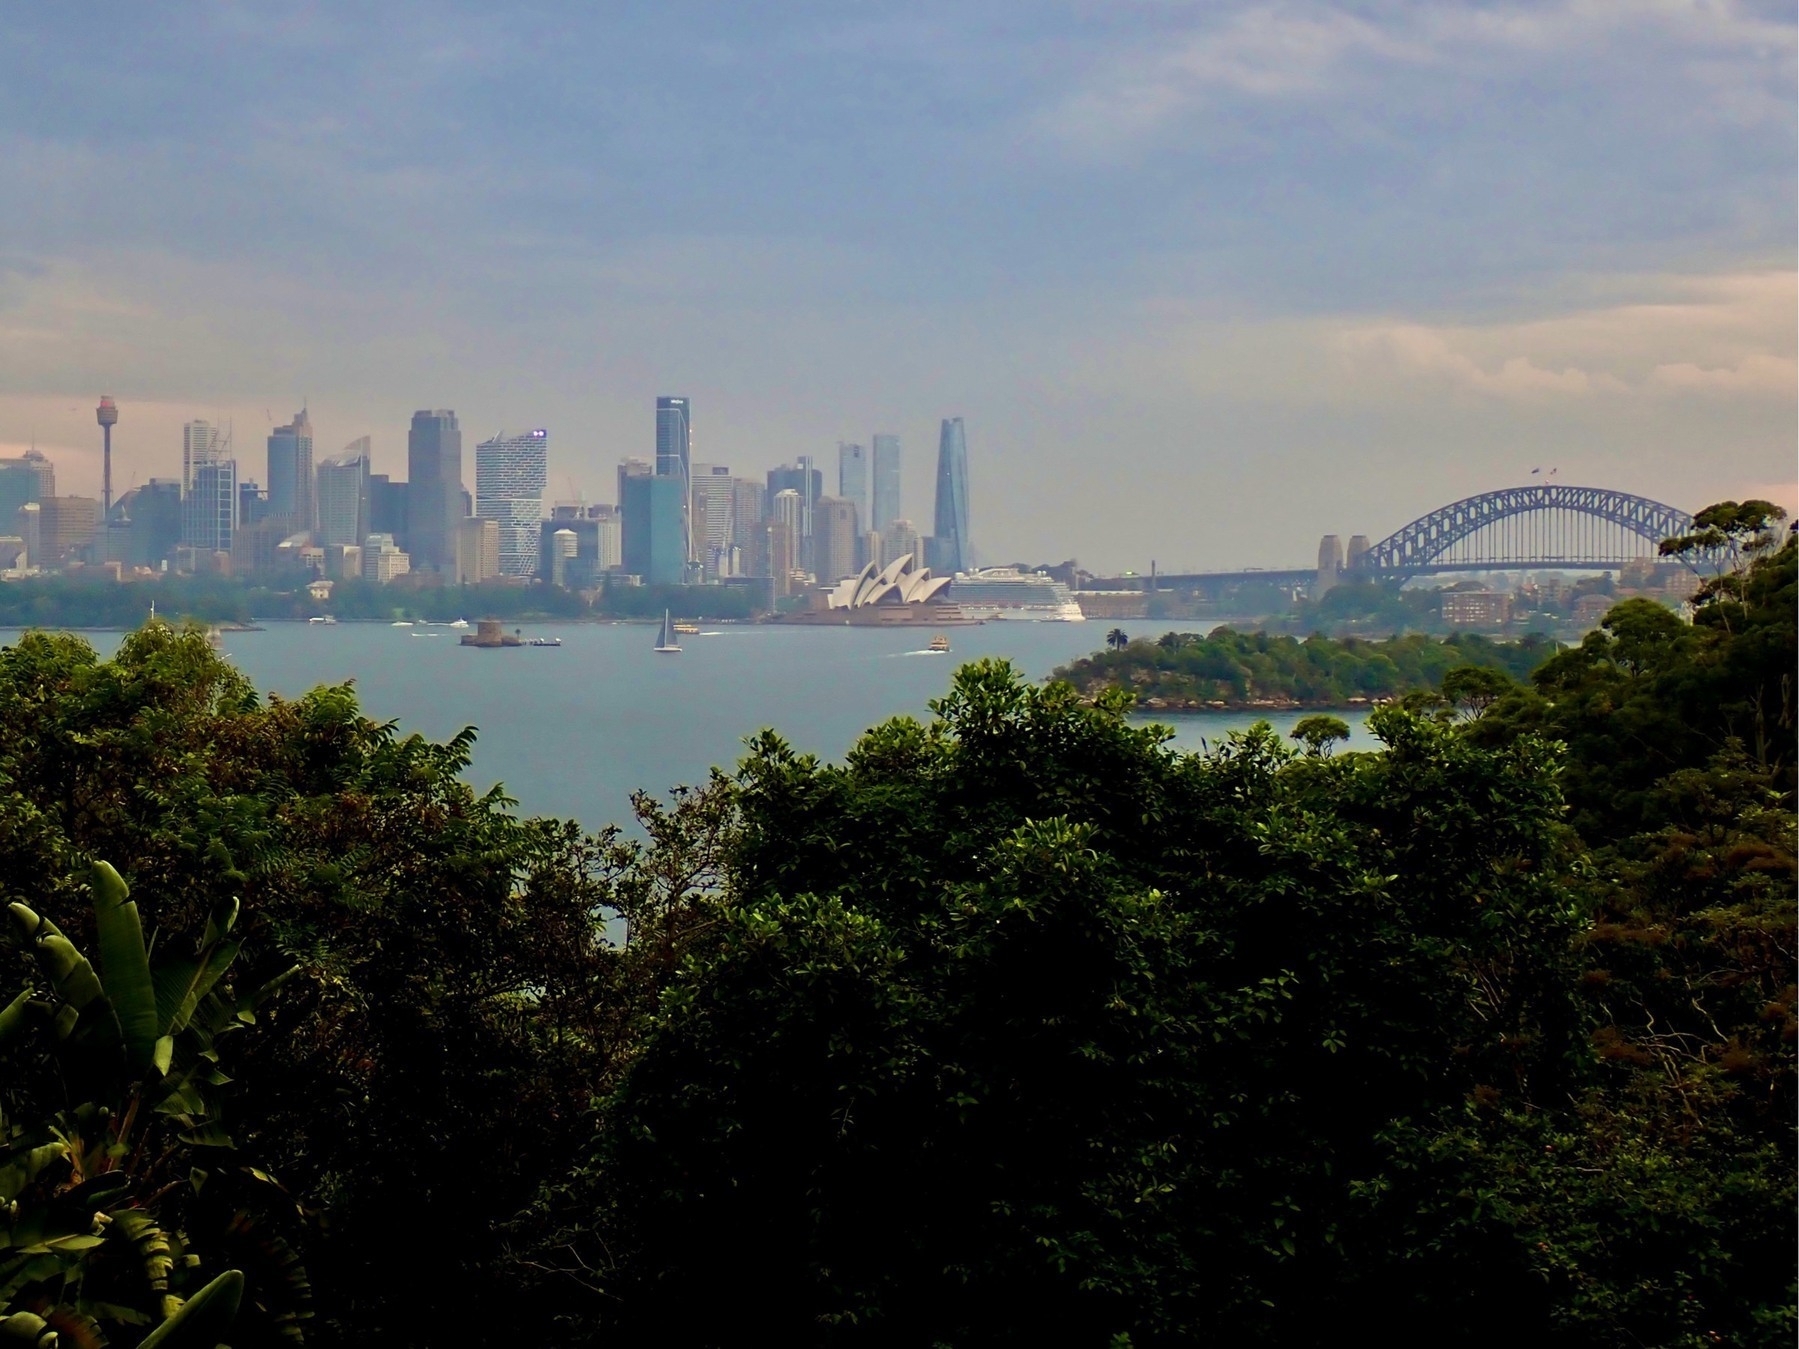 Trees in the foreground and the city of Sydney in the distance